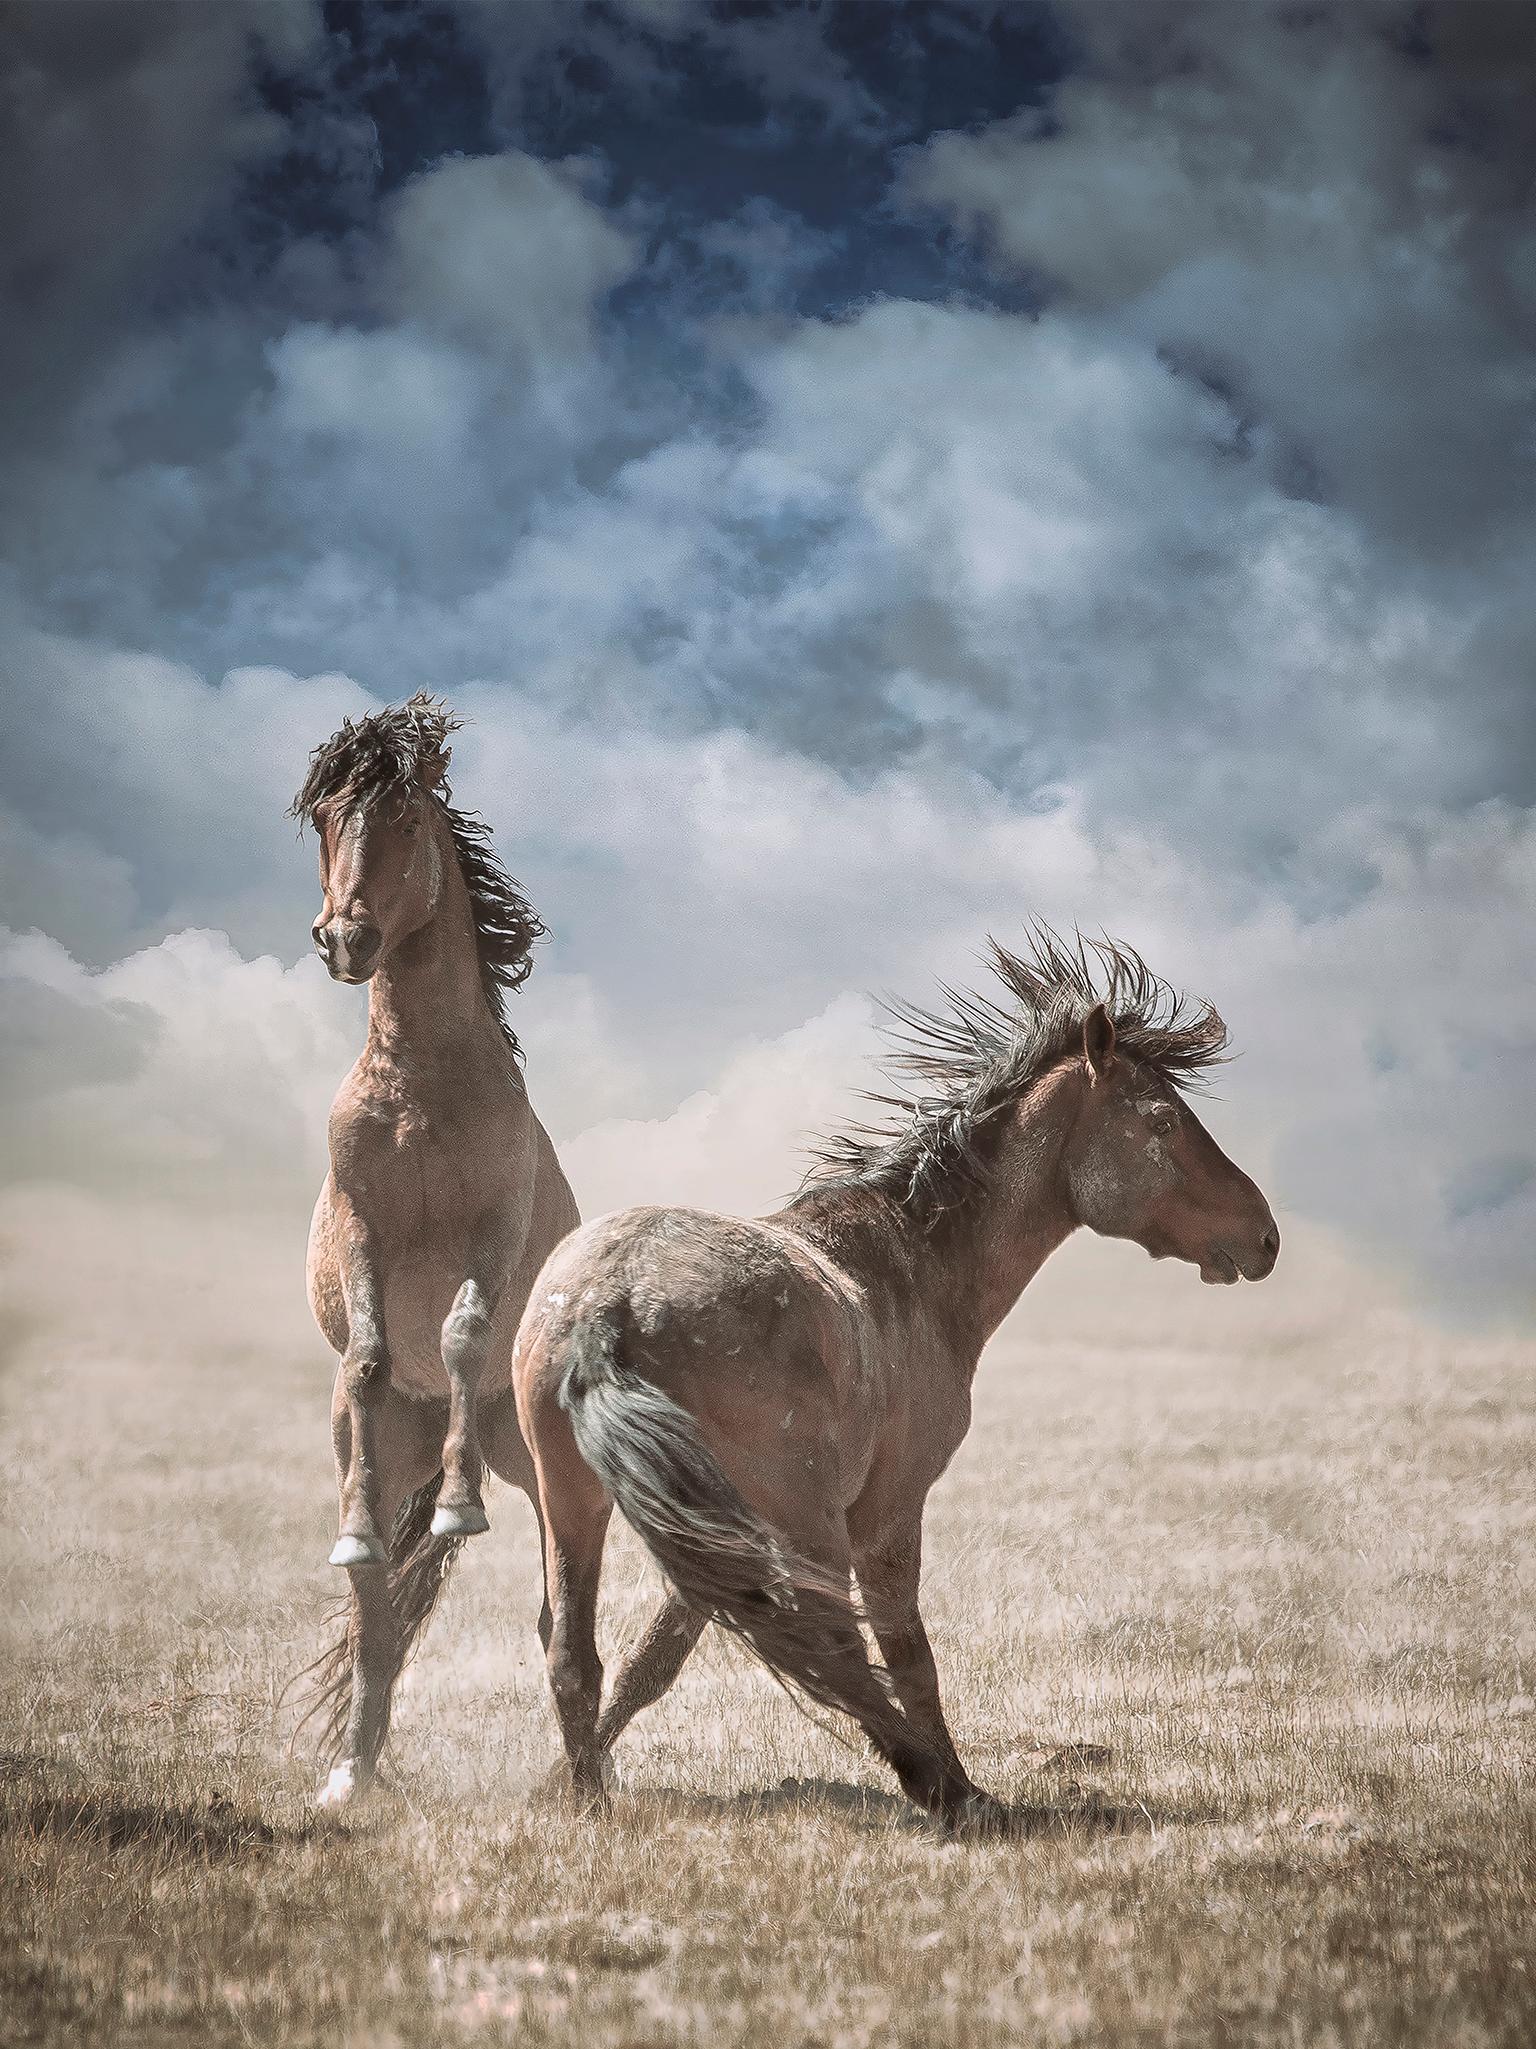  "Wonder Horses" 40x 60 - Wild Horses Photograph - Wild Mustangs Photography  - Art by Shane Russeck